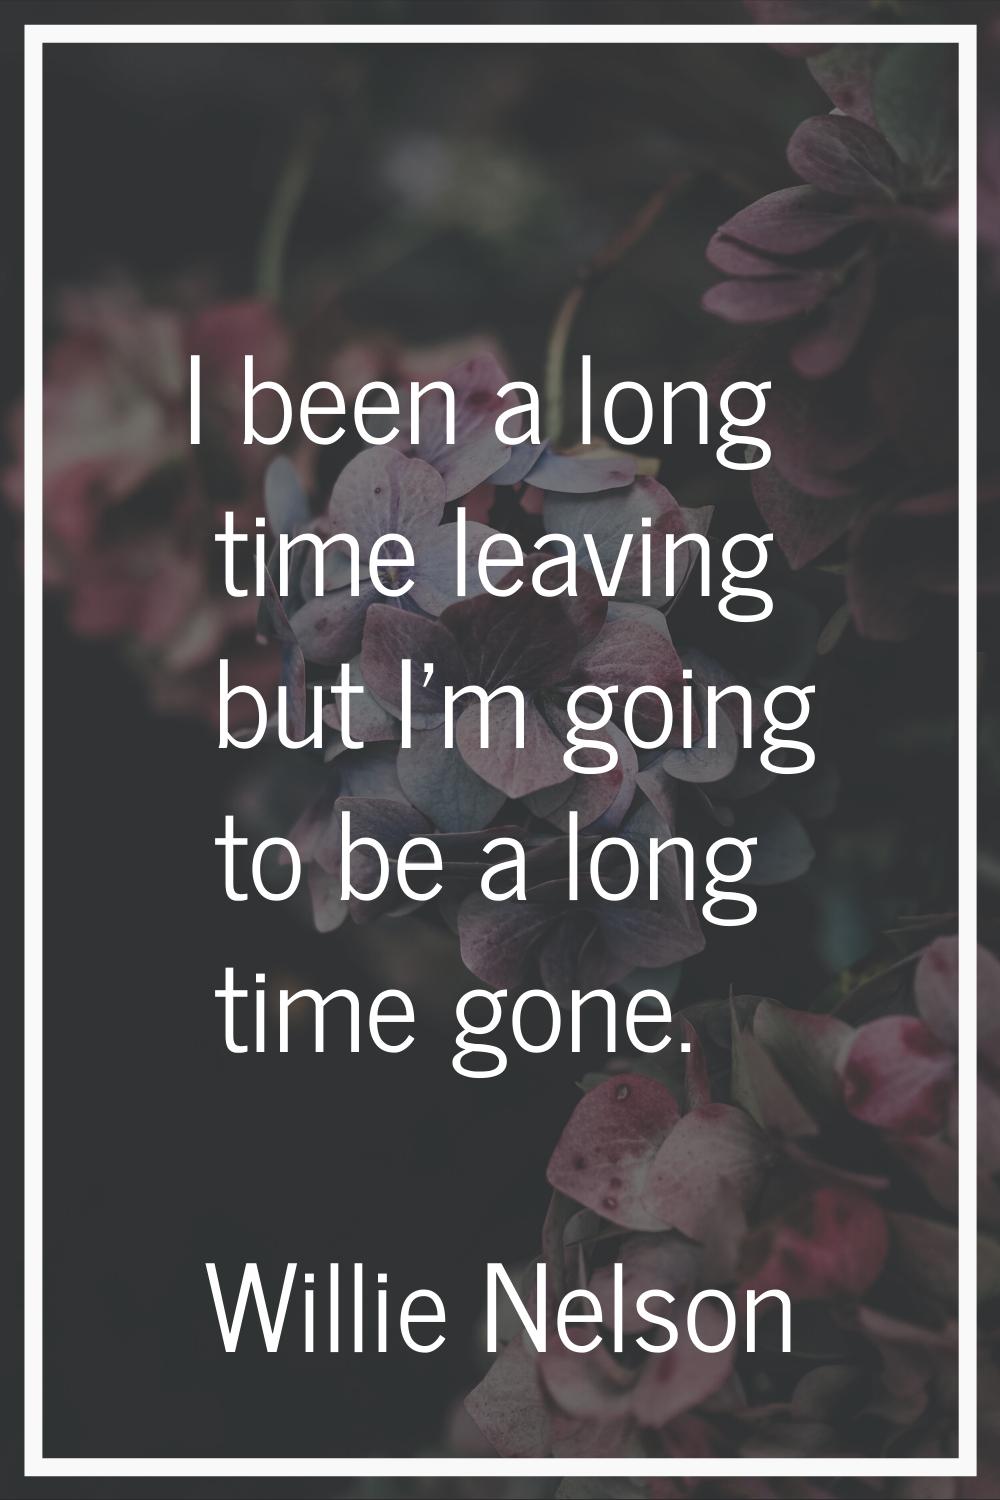 I been a long time leaving but I'm going to be a long time gone.